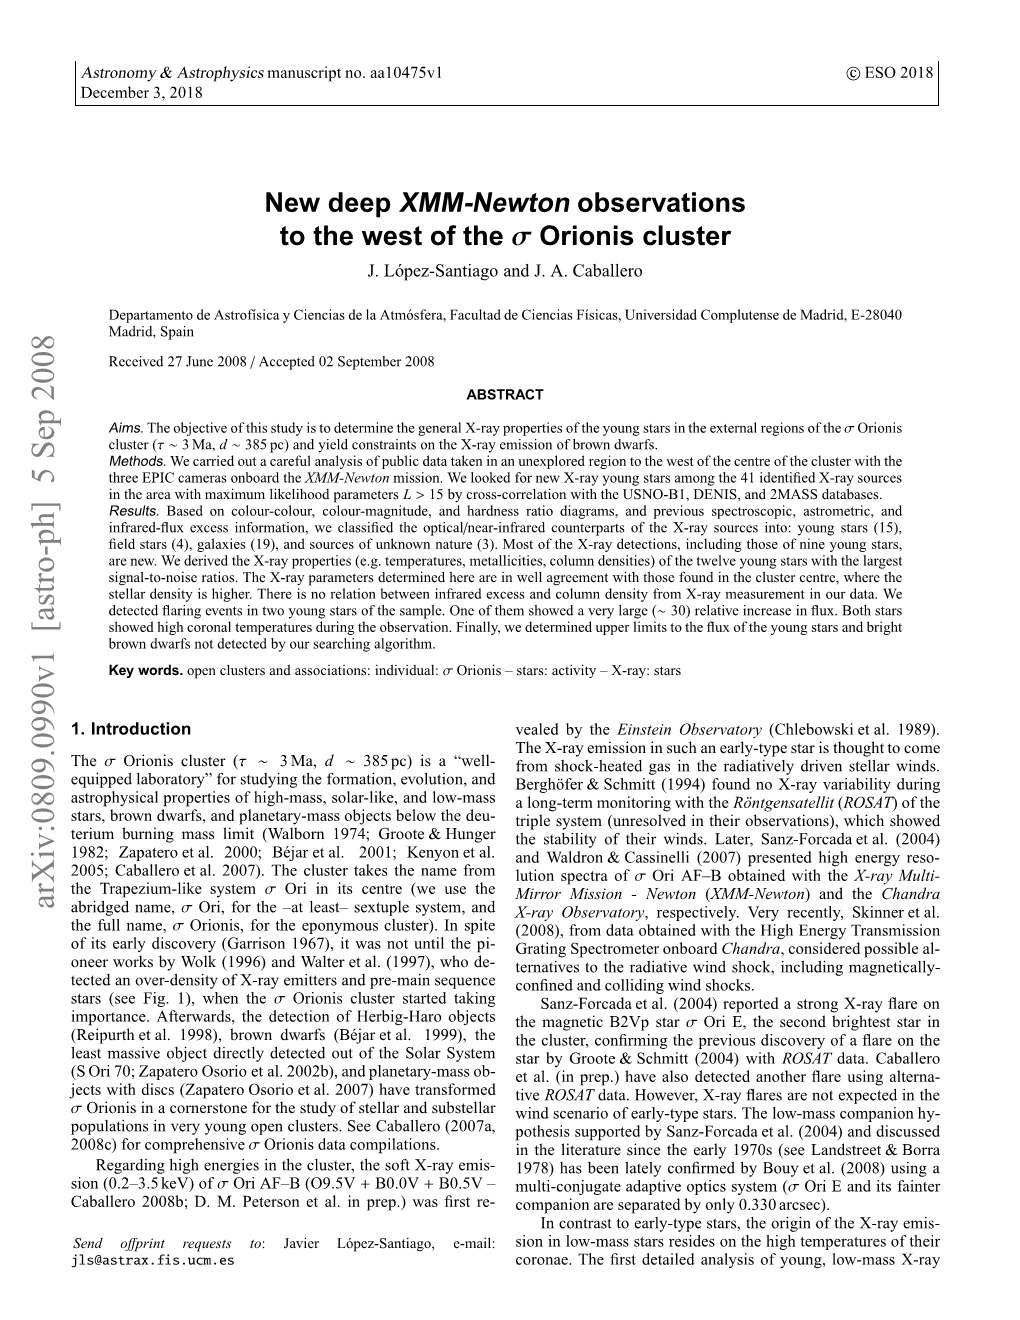 New Deep XMM-Newton Observations to the West of the Sigma Orionis Cluster